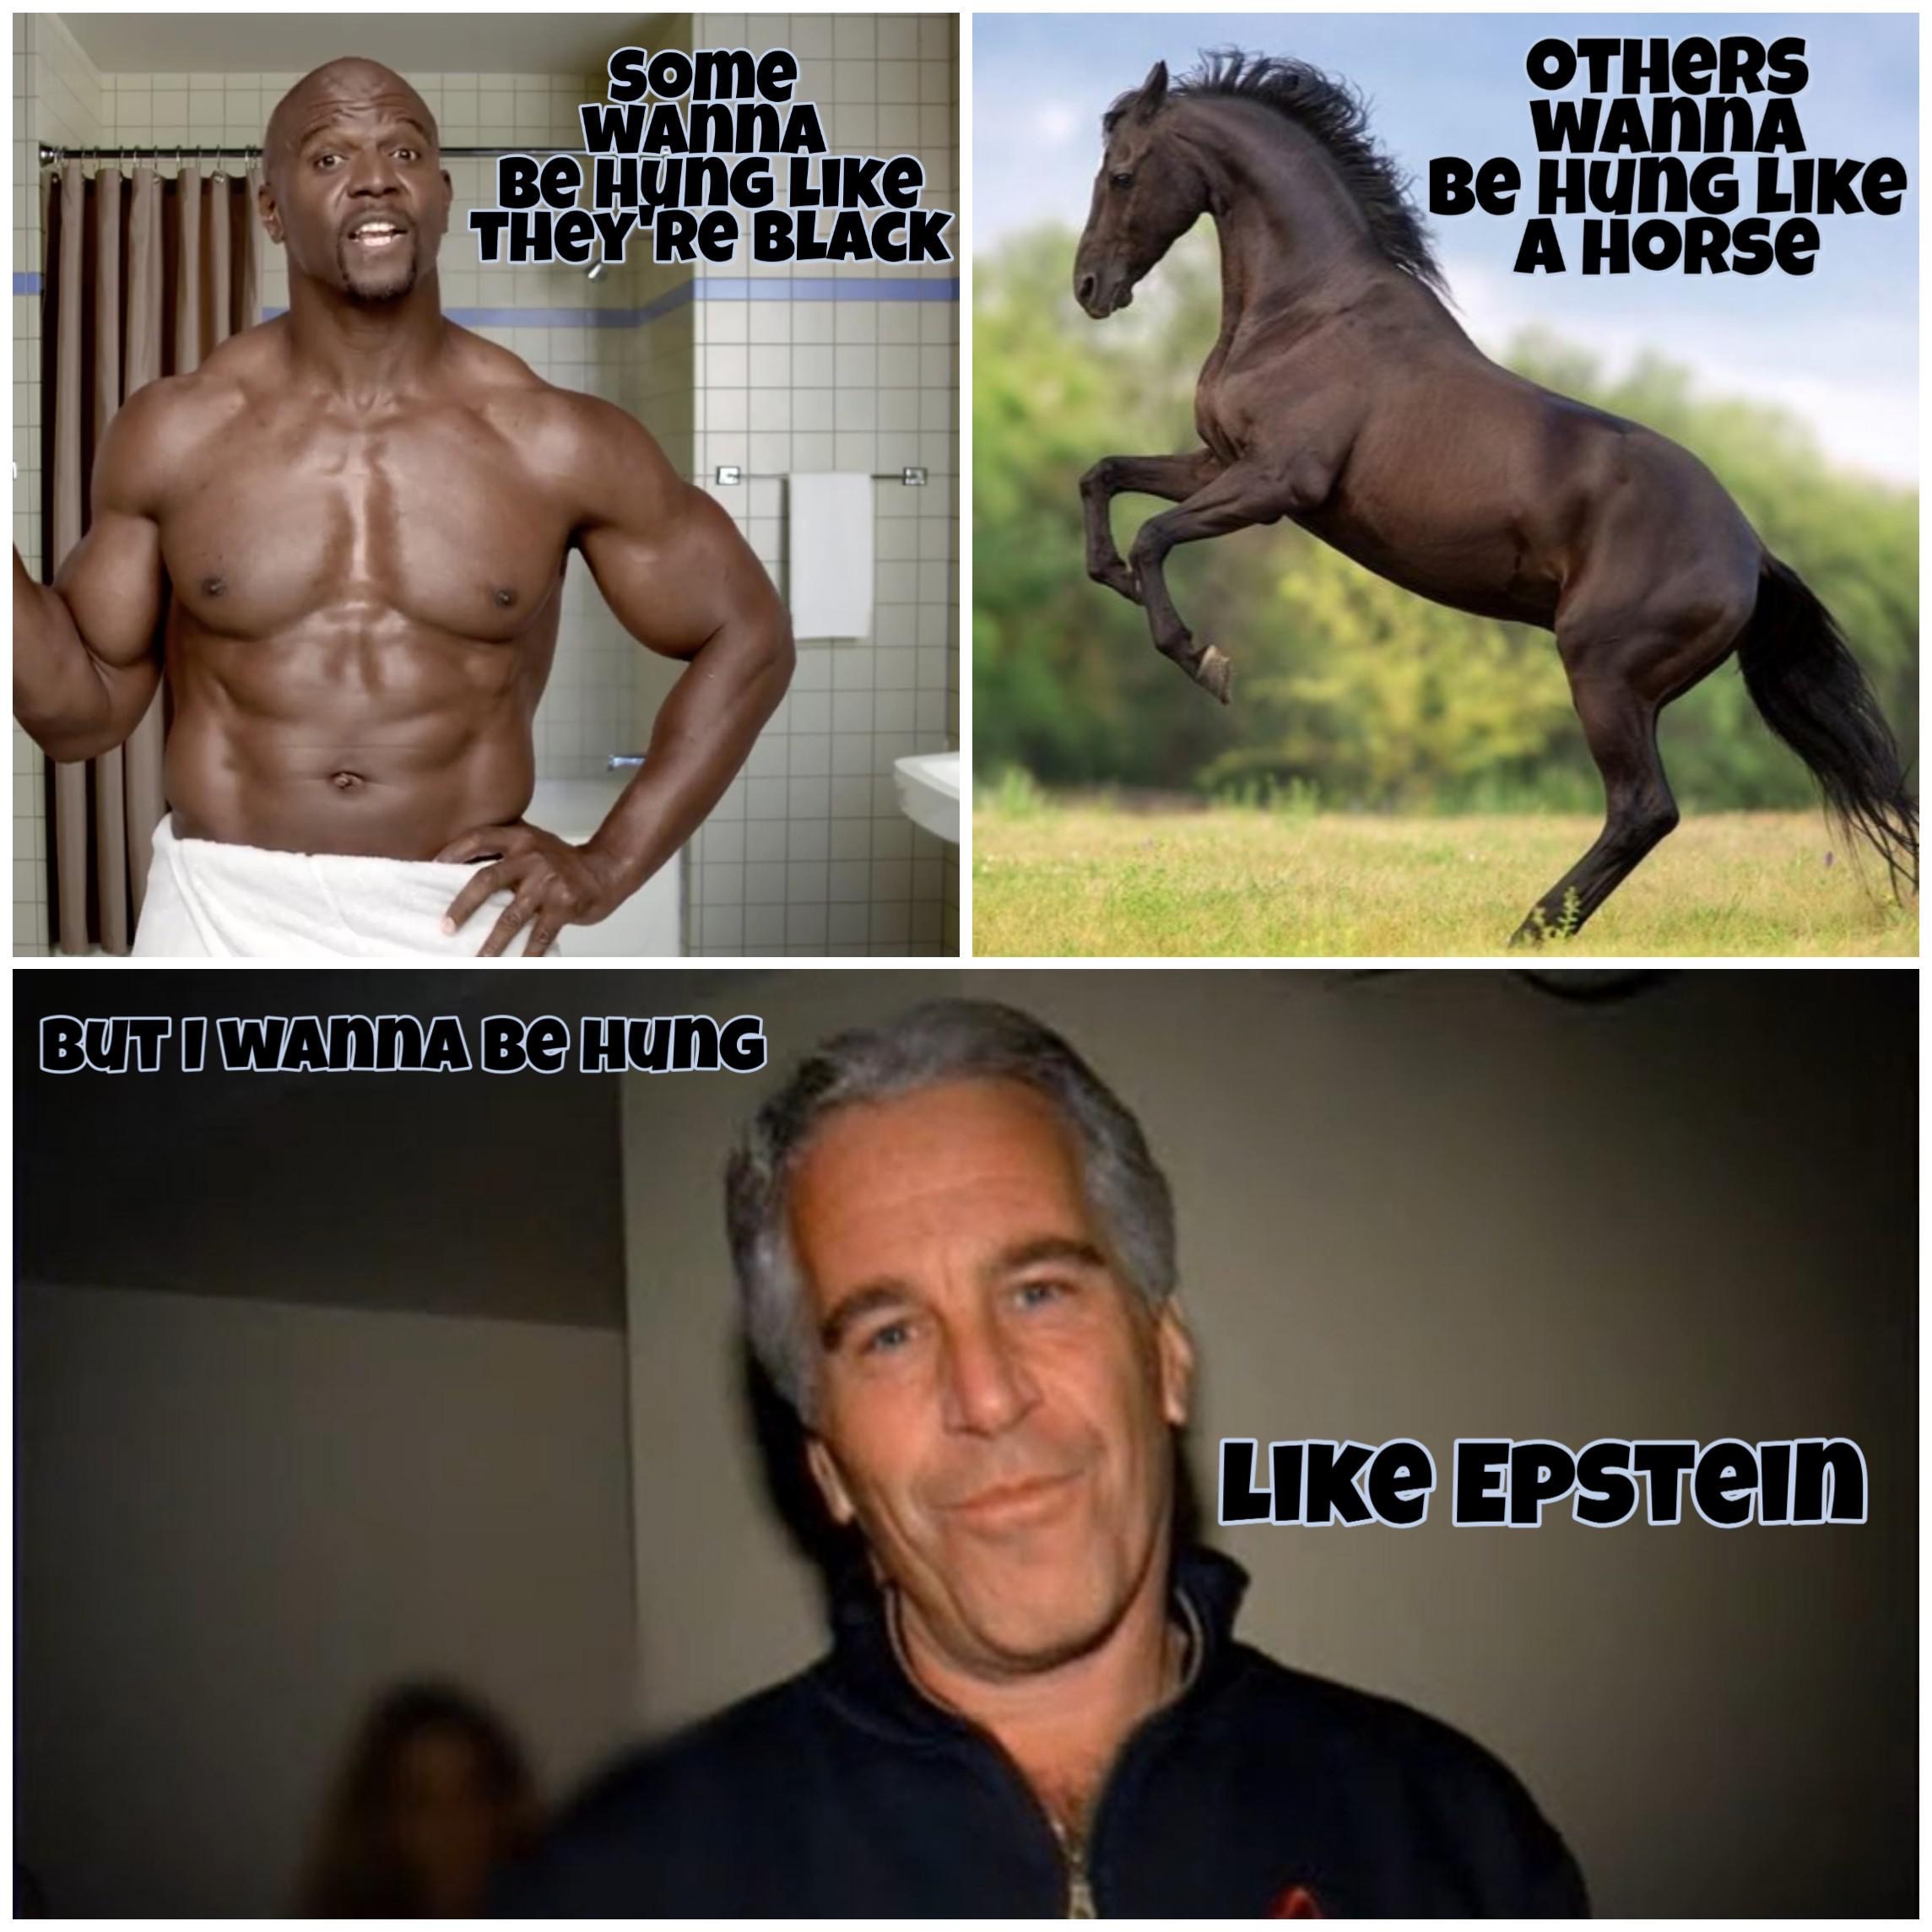 barechestedness - some Wanna Be Hung They'Re Black Others Wanna Be HunG A Horse But I Wannabe Hung EPSTein